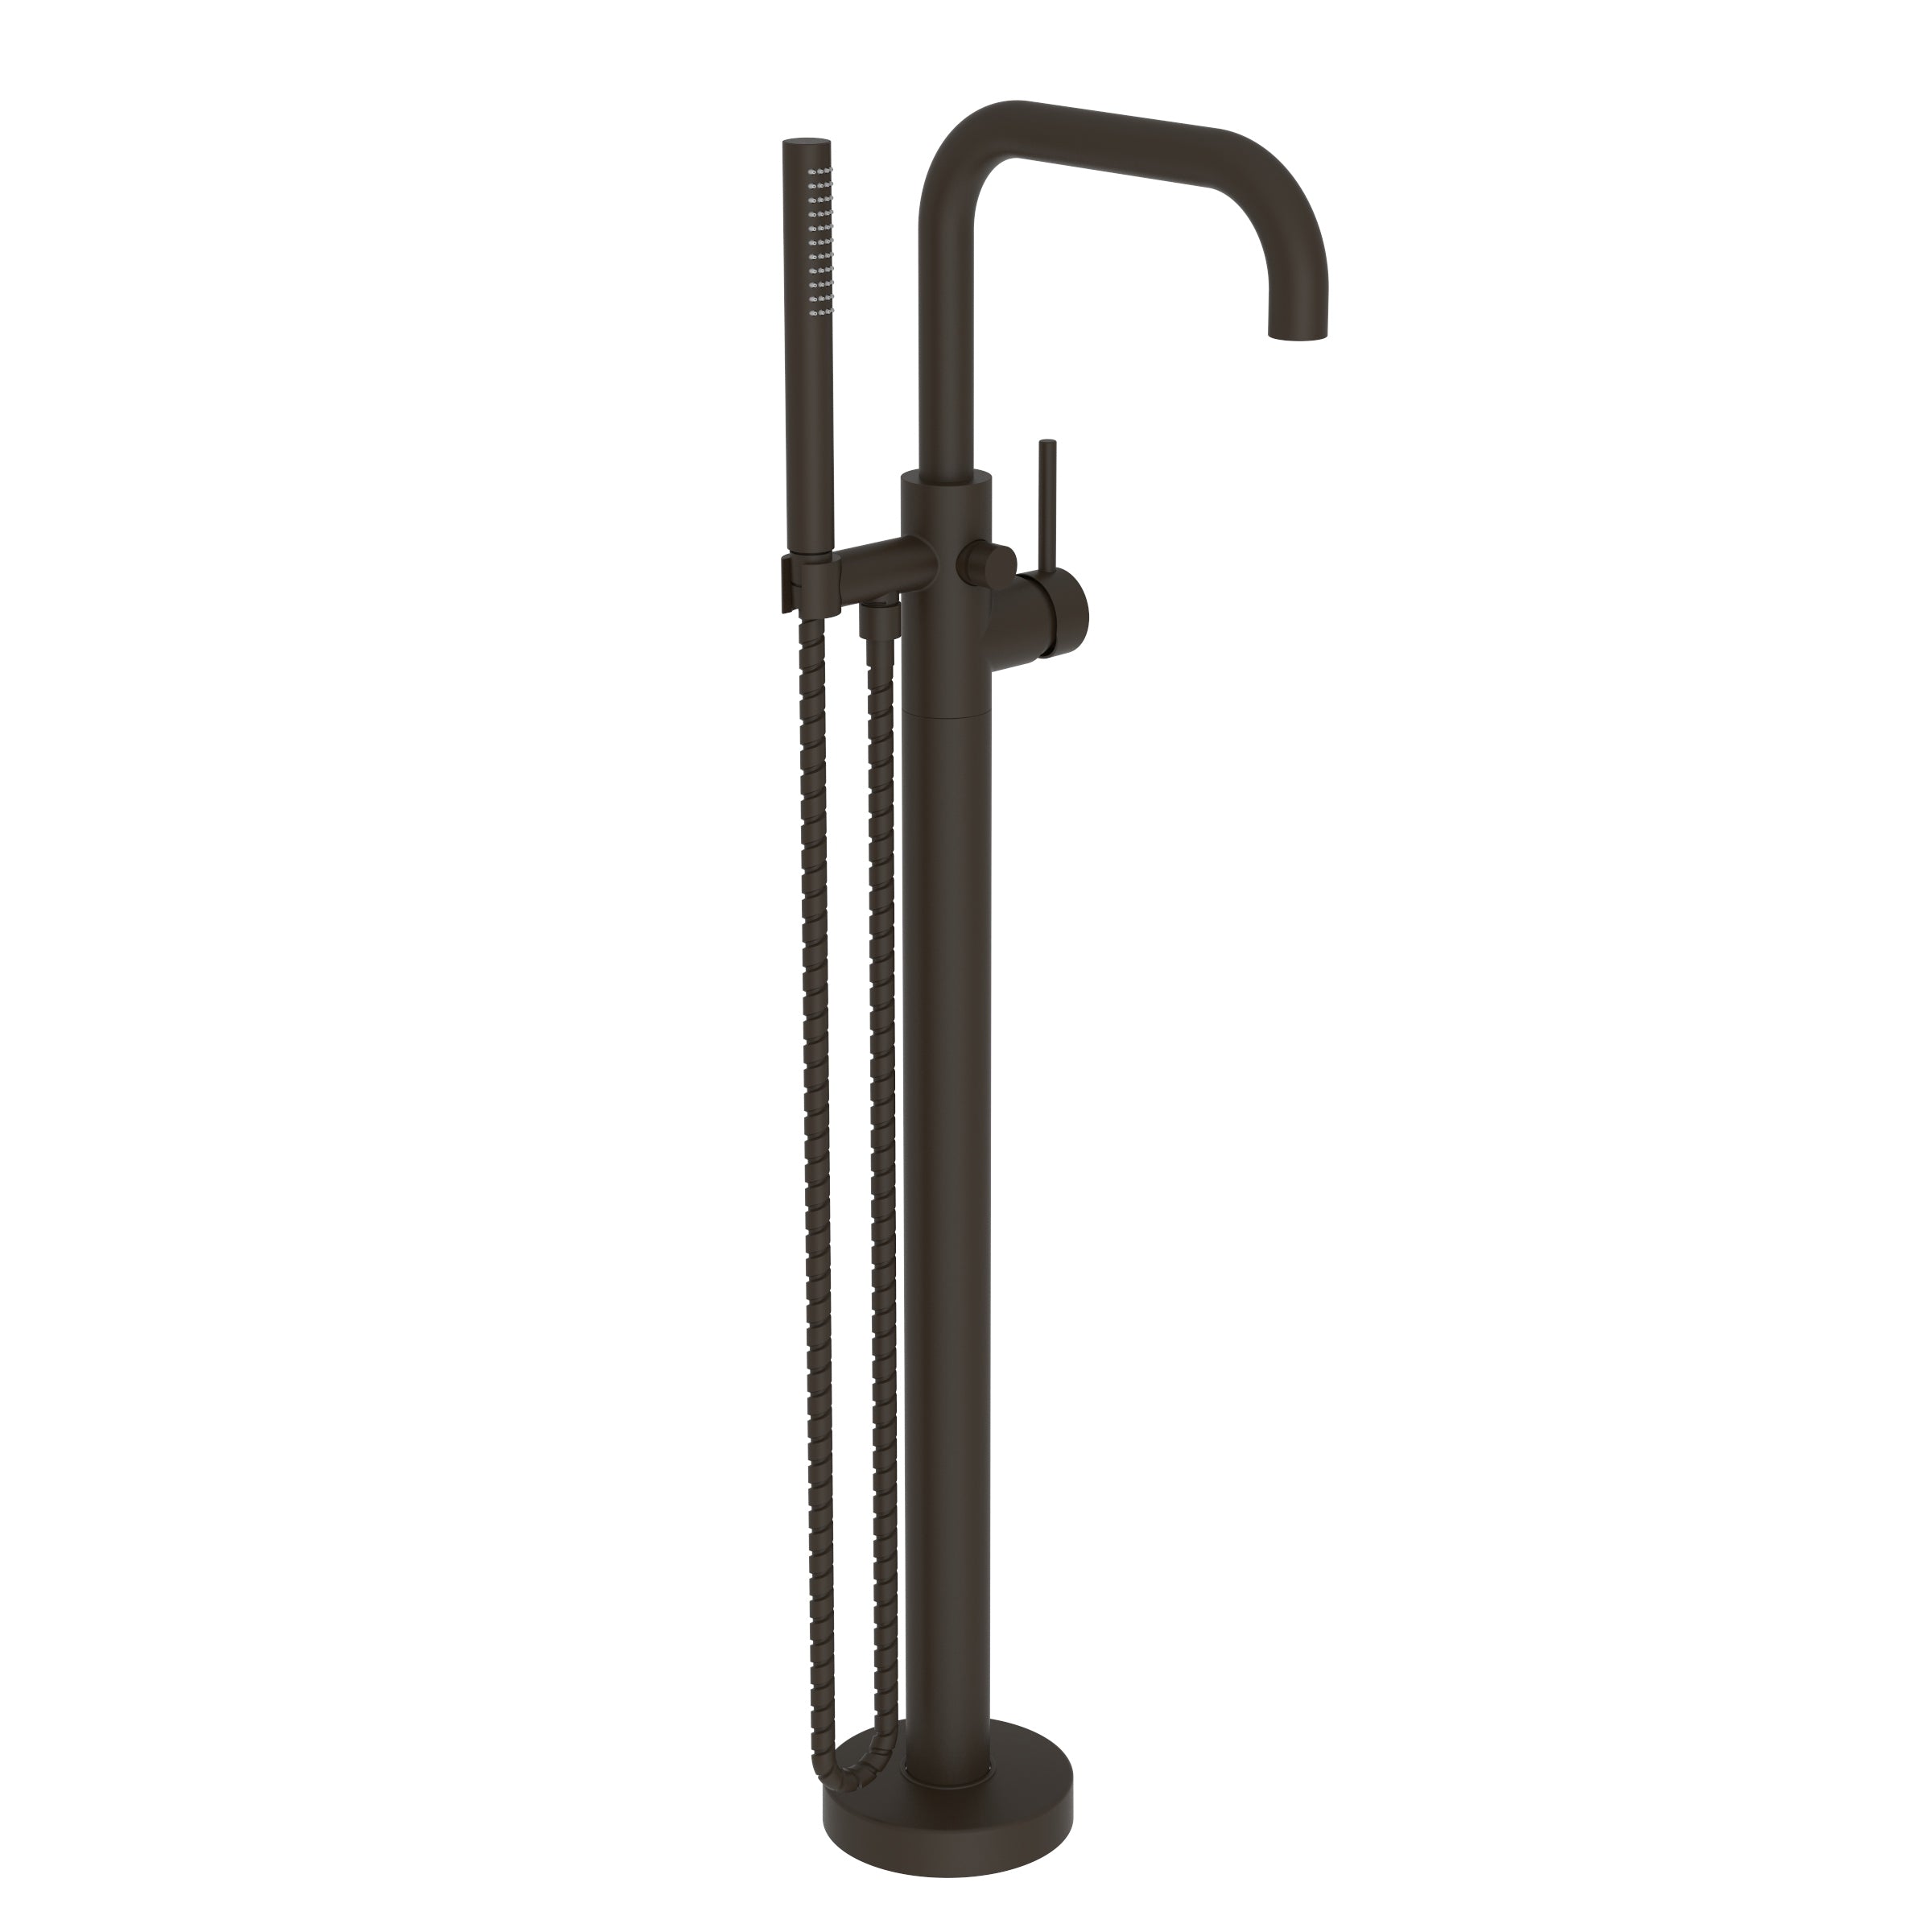 Newport Brass East Square Exposed Tub and Hand Shower Set - Free Standing